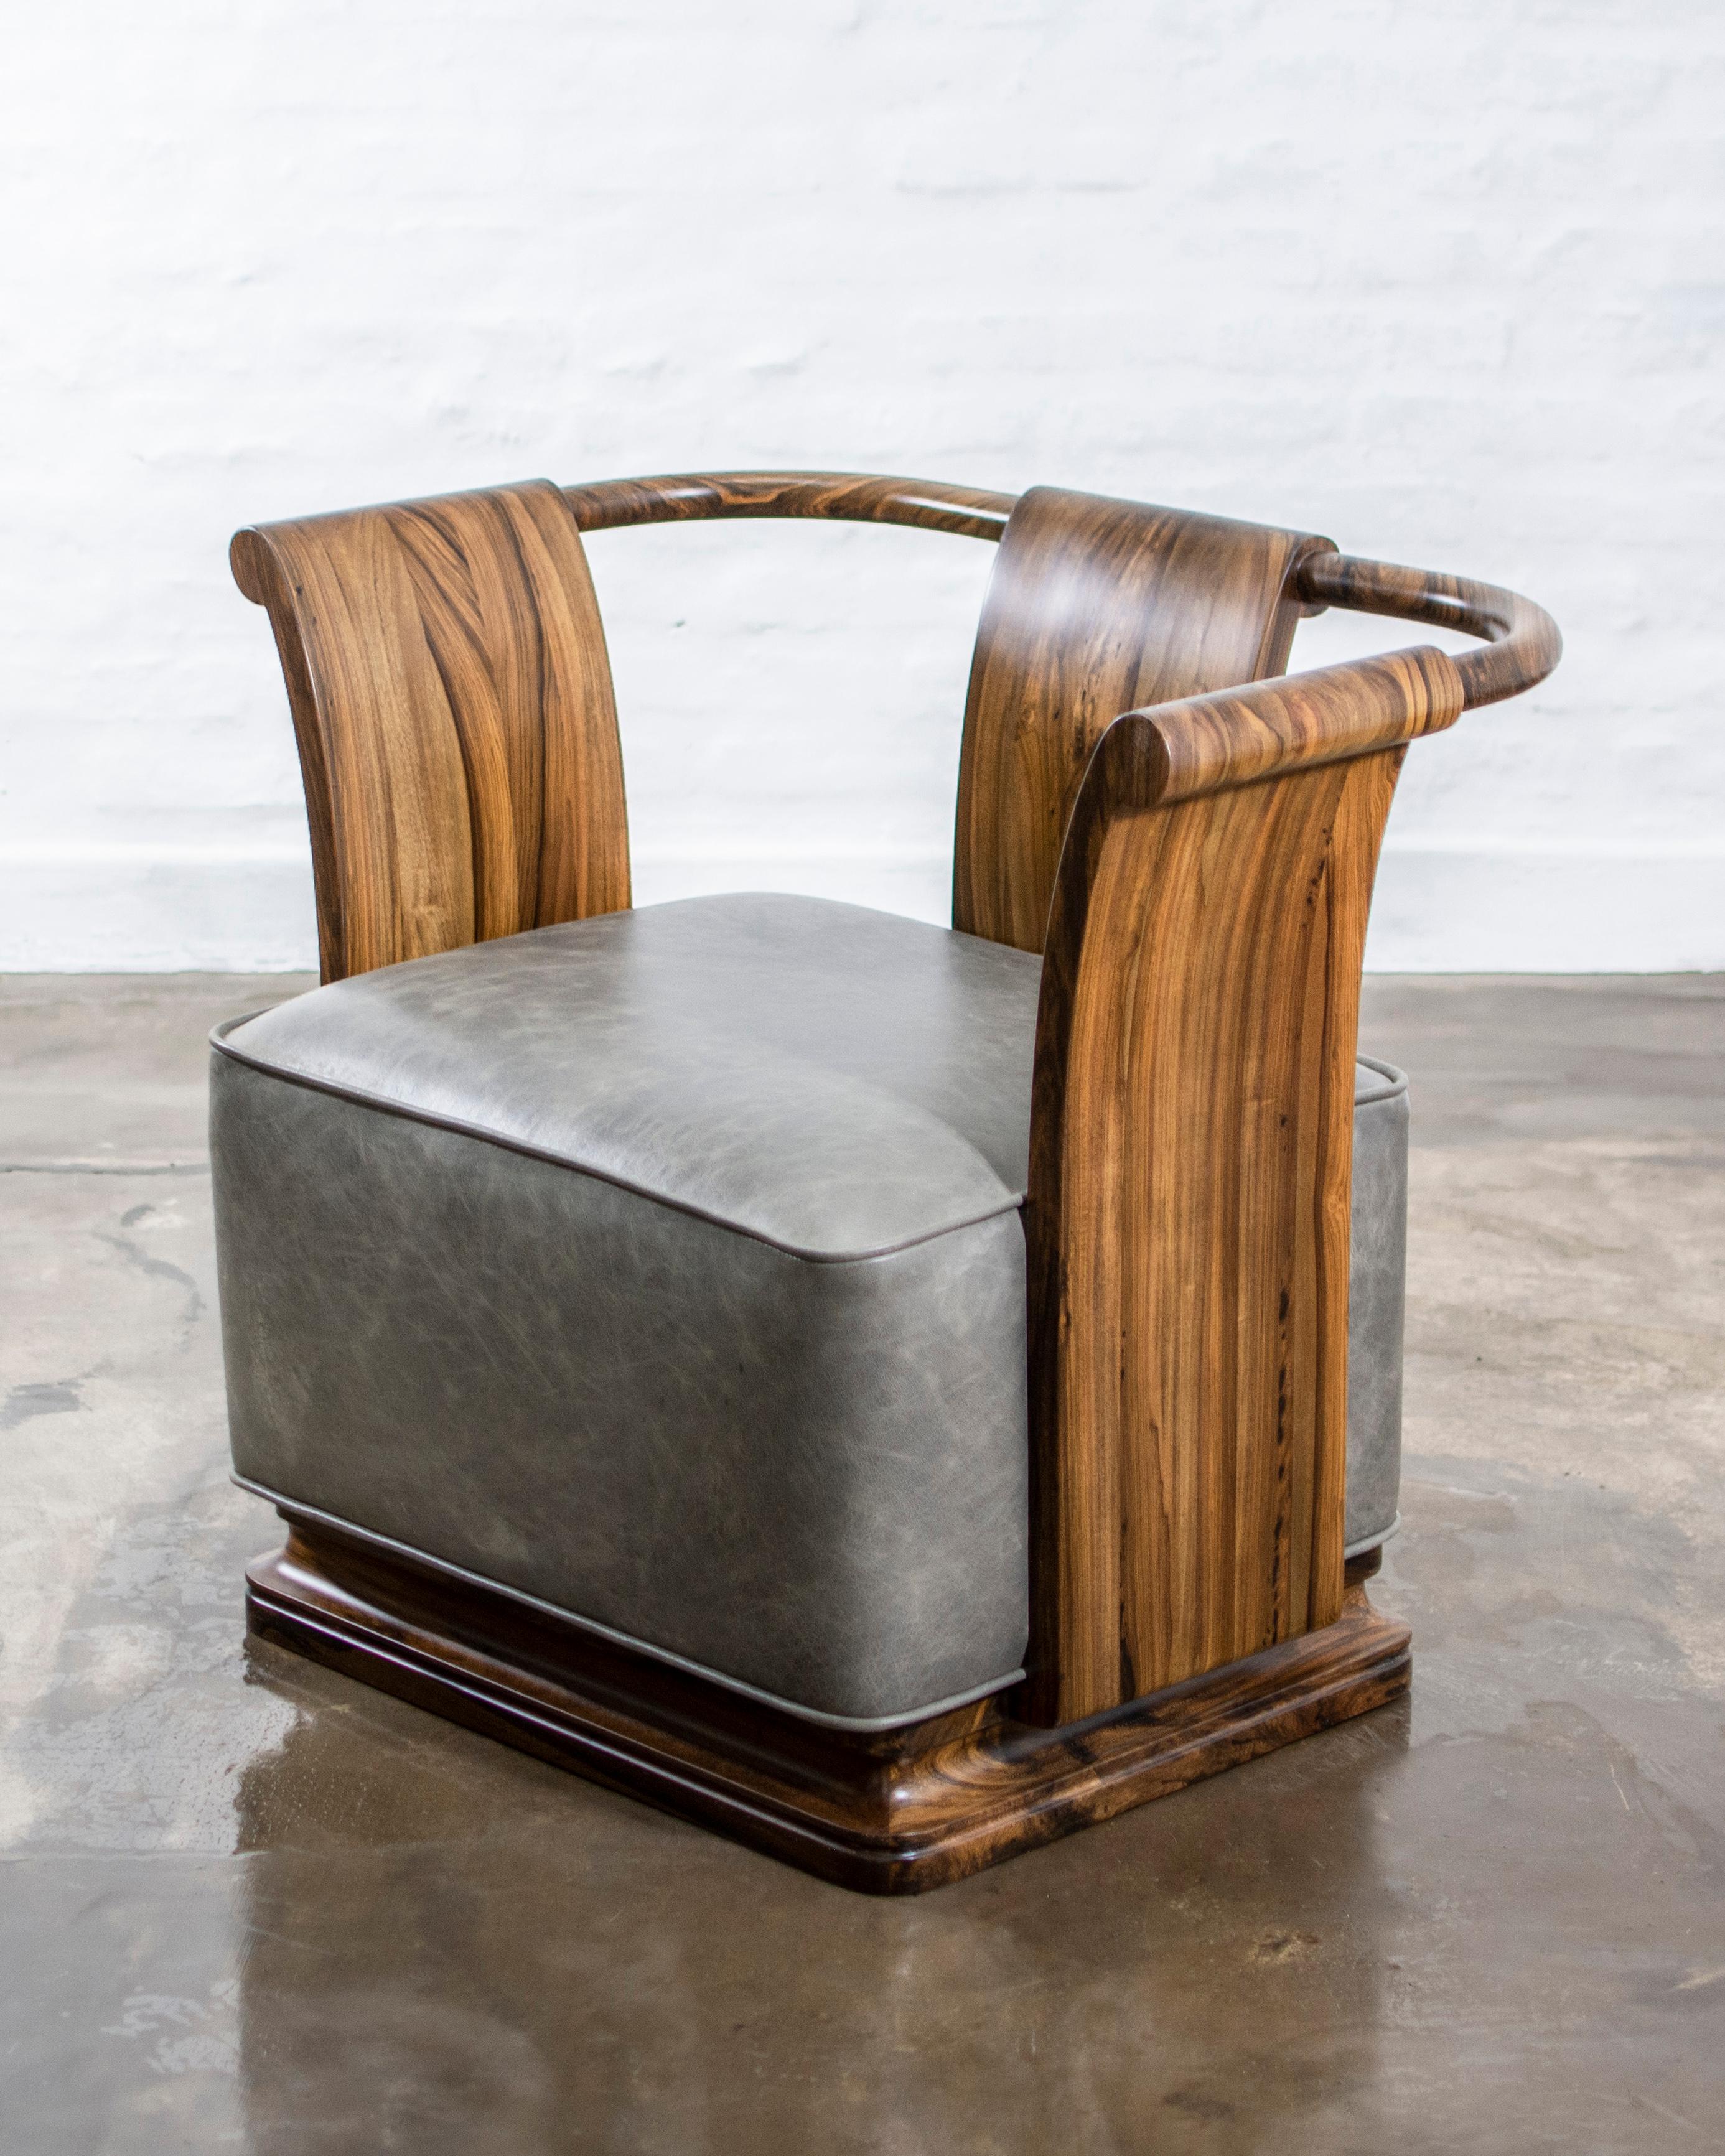 The Simone's gently sloping sides and back allude to forms from early 20th century French design. Debuted in 2009 at the Salone del Mobile. Available immediately as shown in Argentine Rosewood and leather or available in various finishes and the